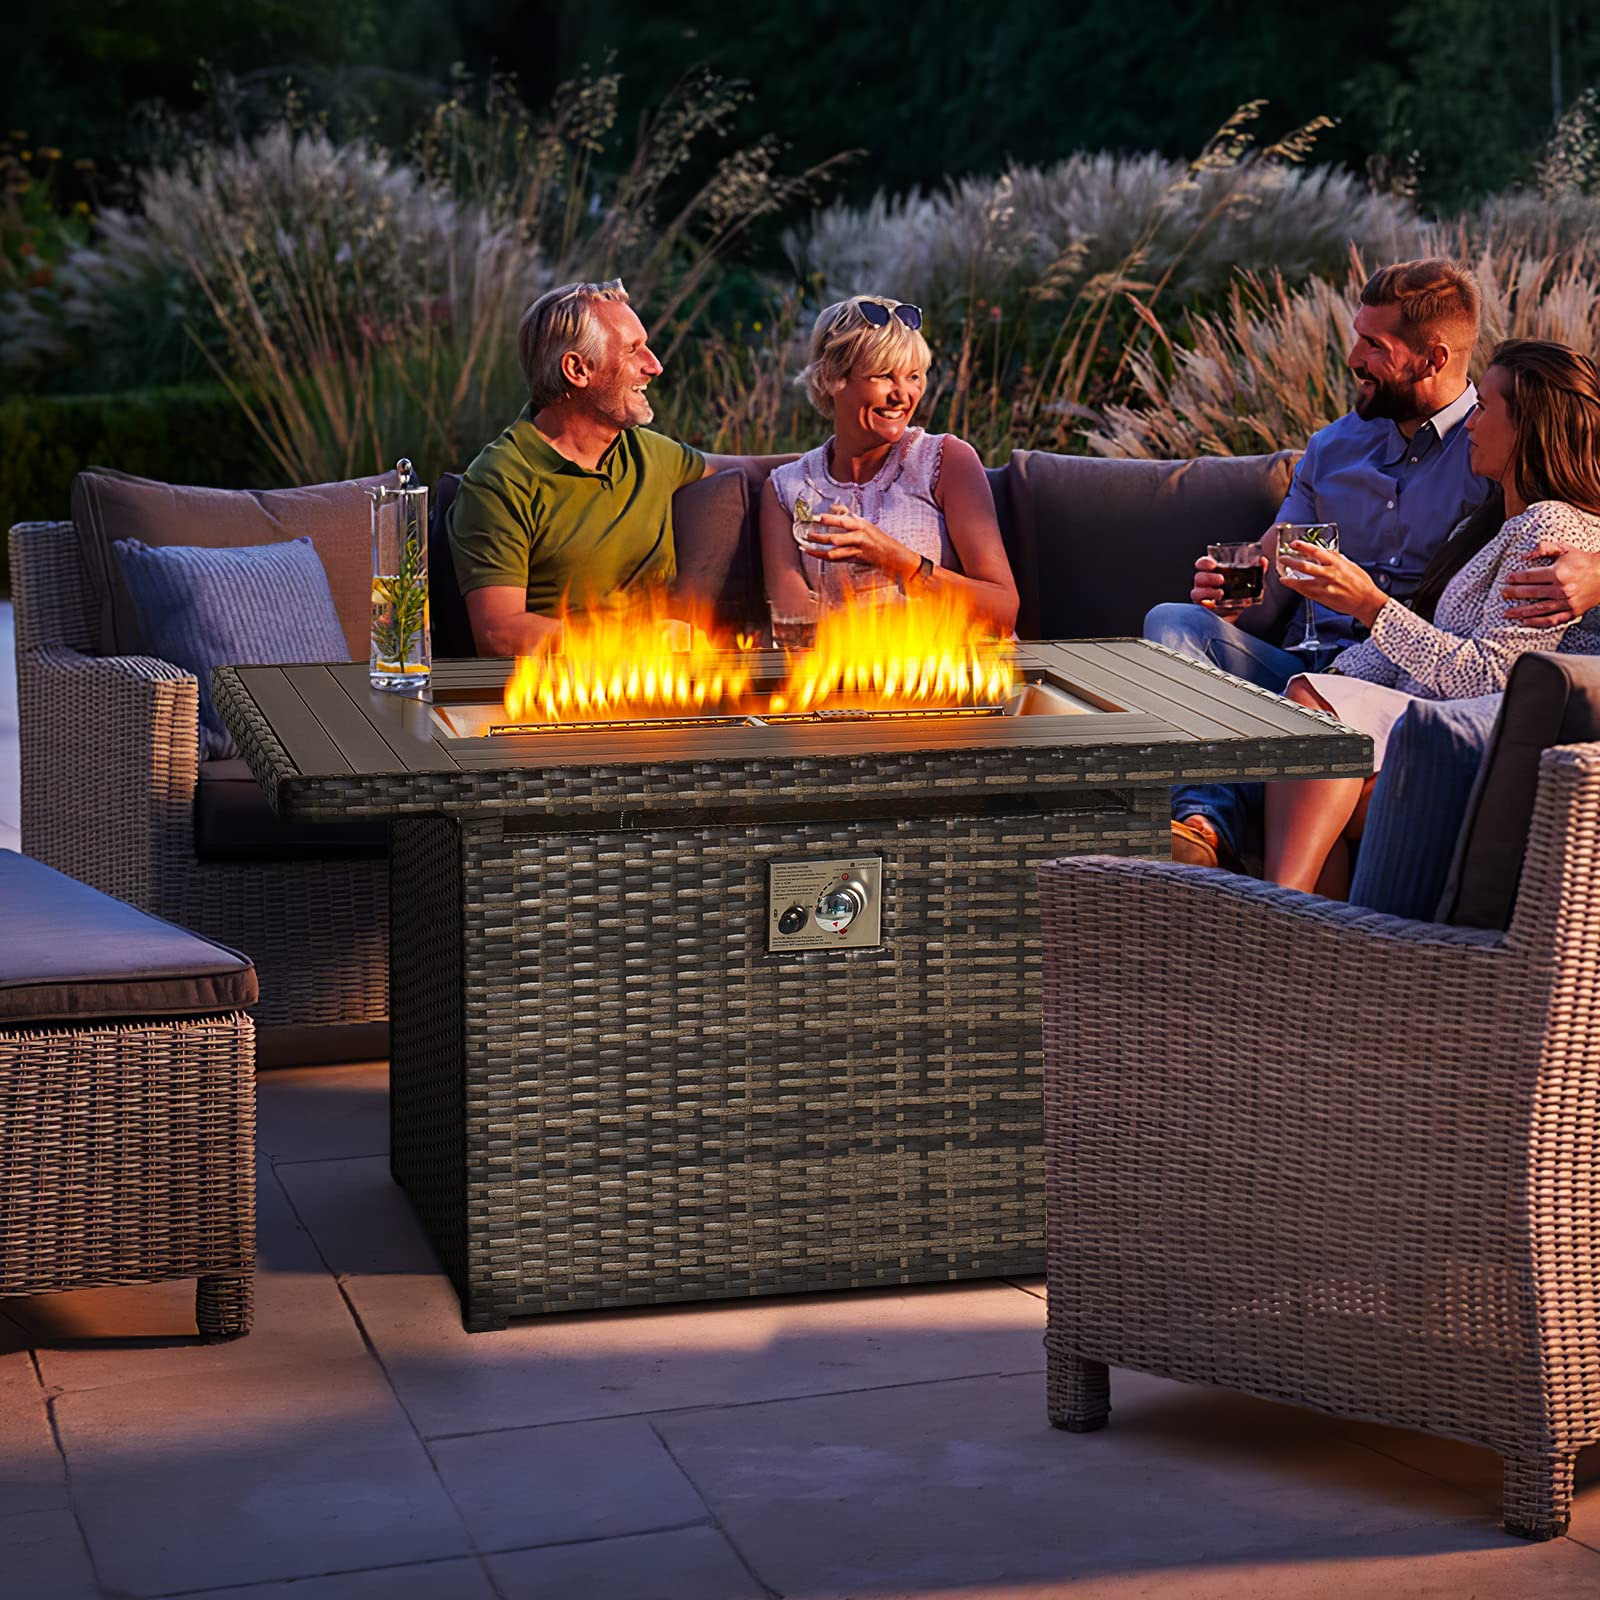 oneinmil 44" Outdoor Fire Pit Table, CSA Certification 50,000 BTU Propan Fire Pit Table with Auto-Ignition, Patio Wicker Firepit with Oxford Cover, Grey